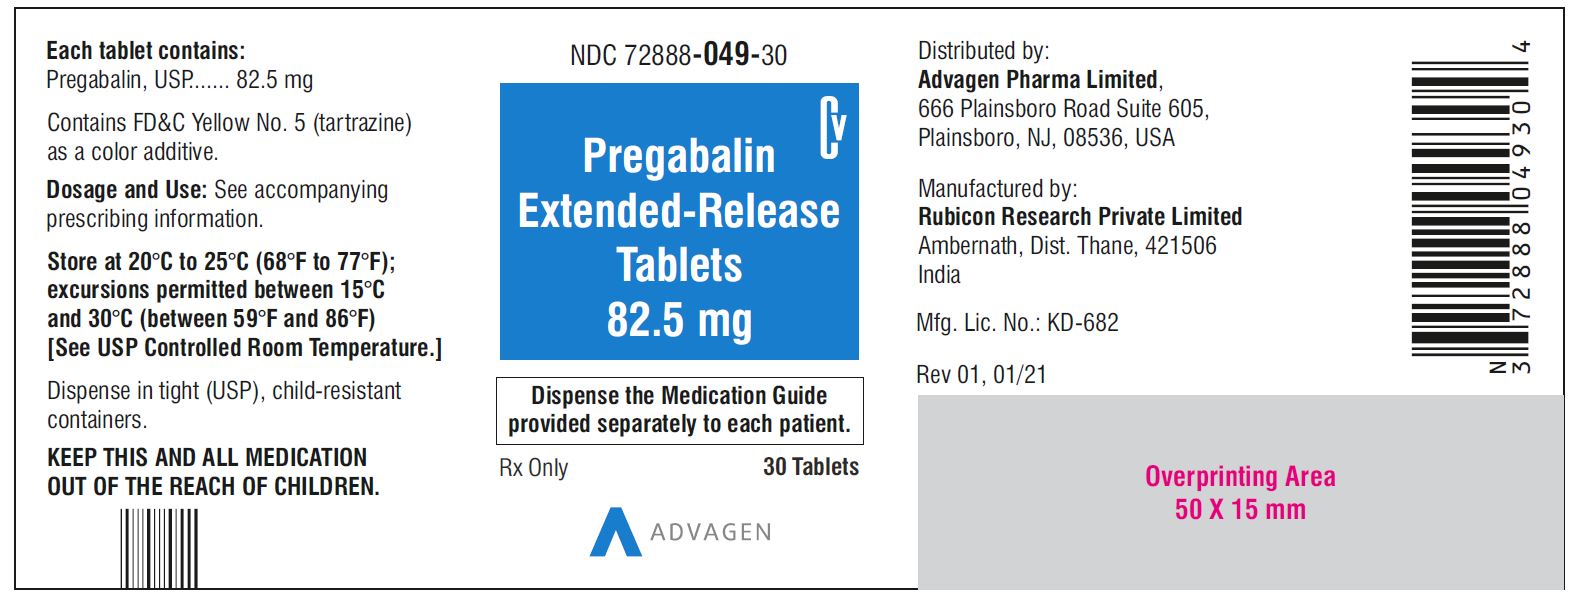 Pregabalin Extended-Release tablets, 82.5 mg - NDC: <a href=/NDC/72888-049-30>72888-049-30</a> - 30 Tablets Container Label